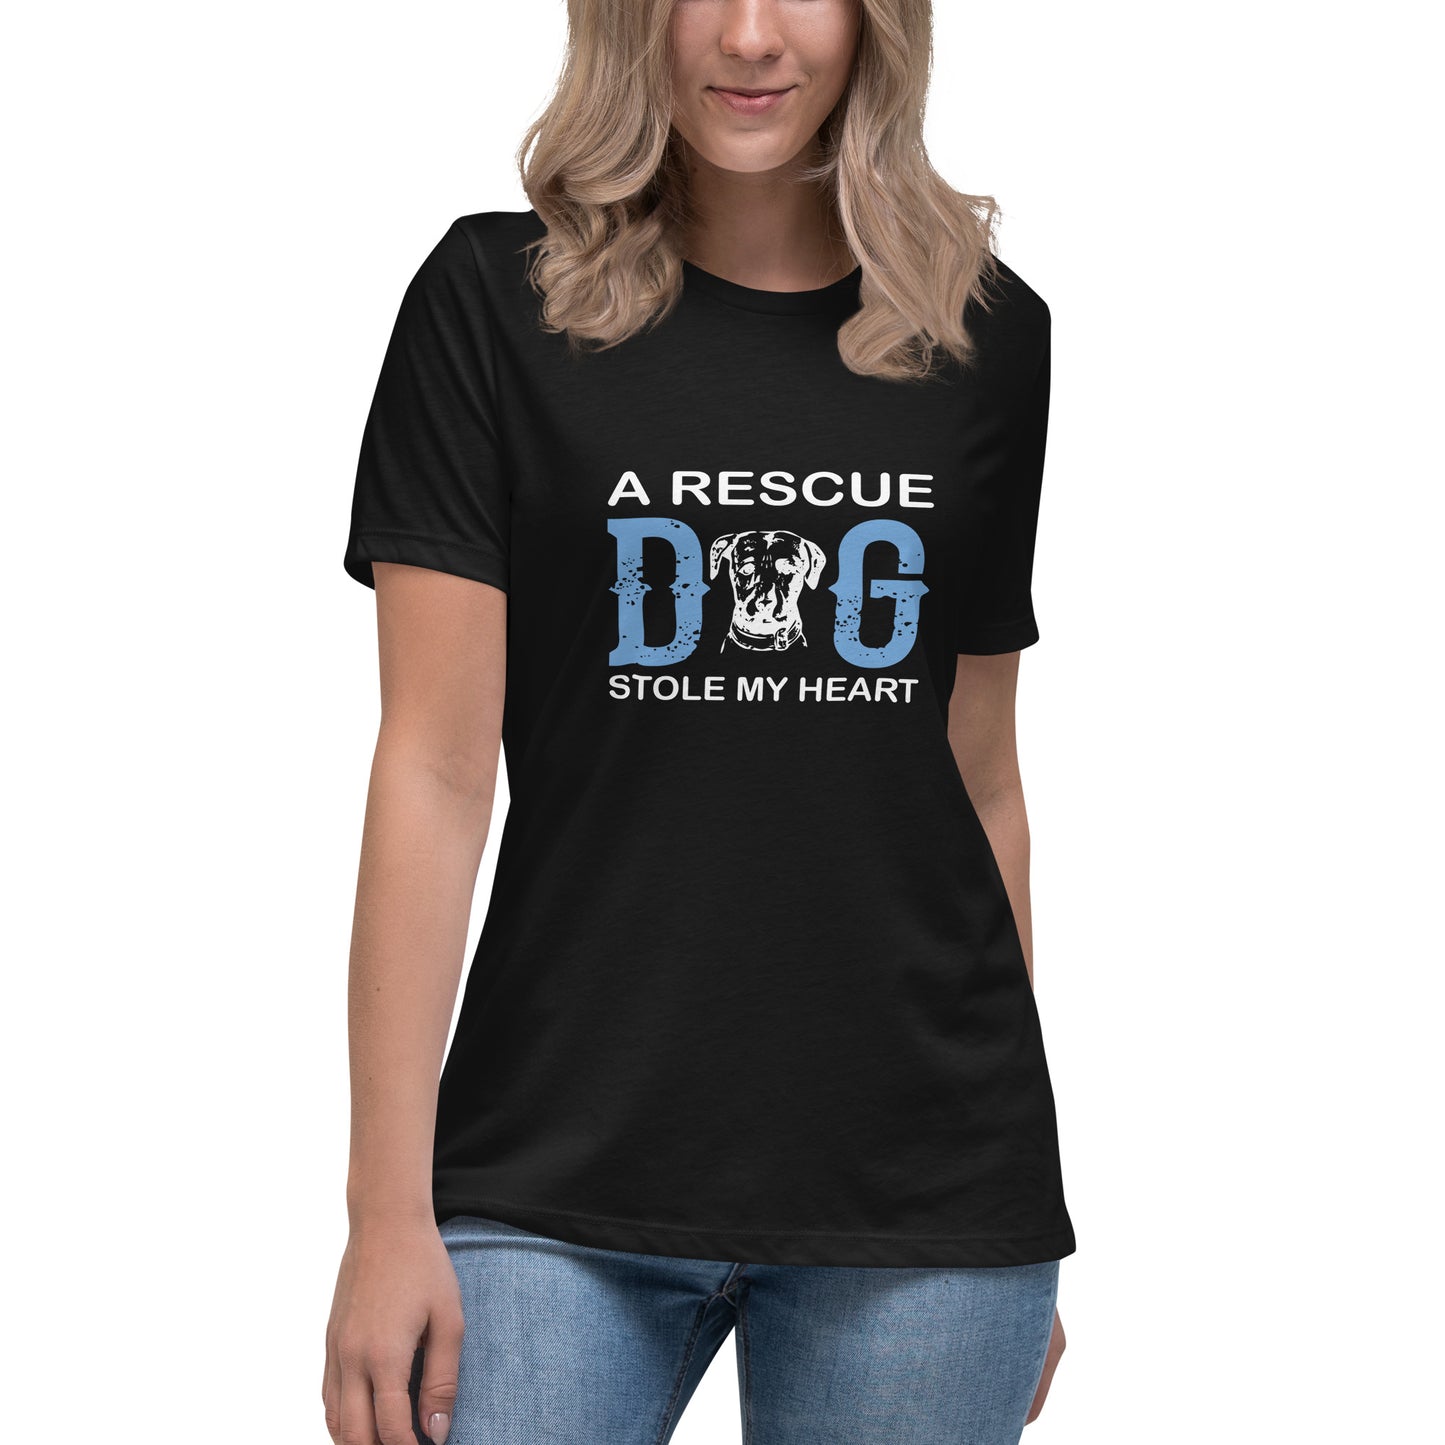 Women's Relaxed T-Shirt A RESCUE DOG